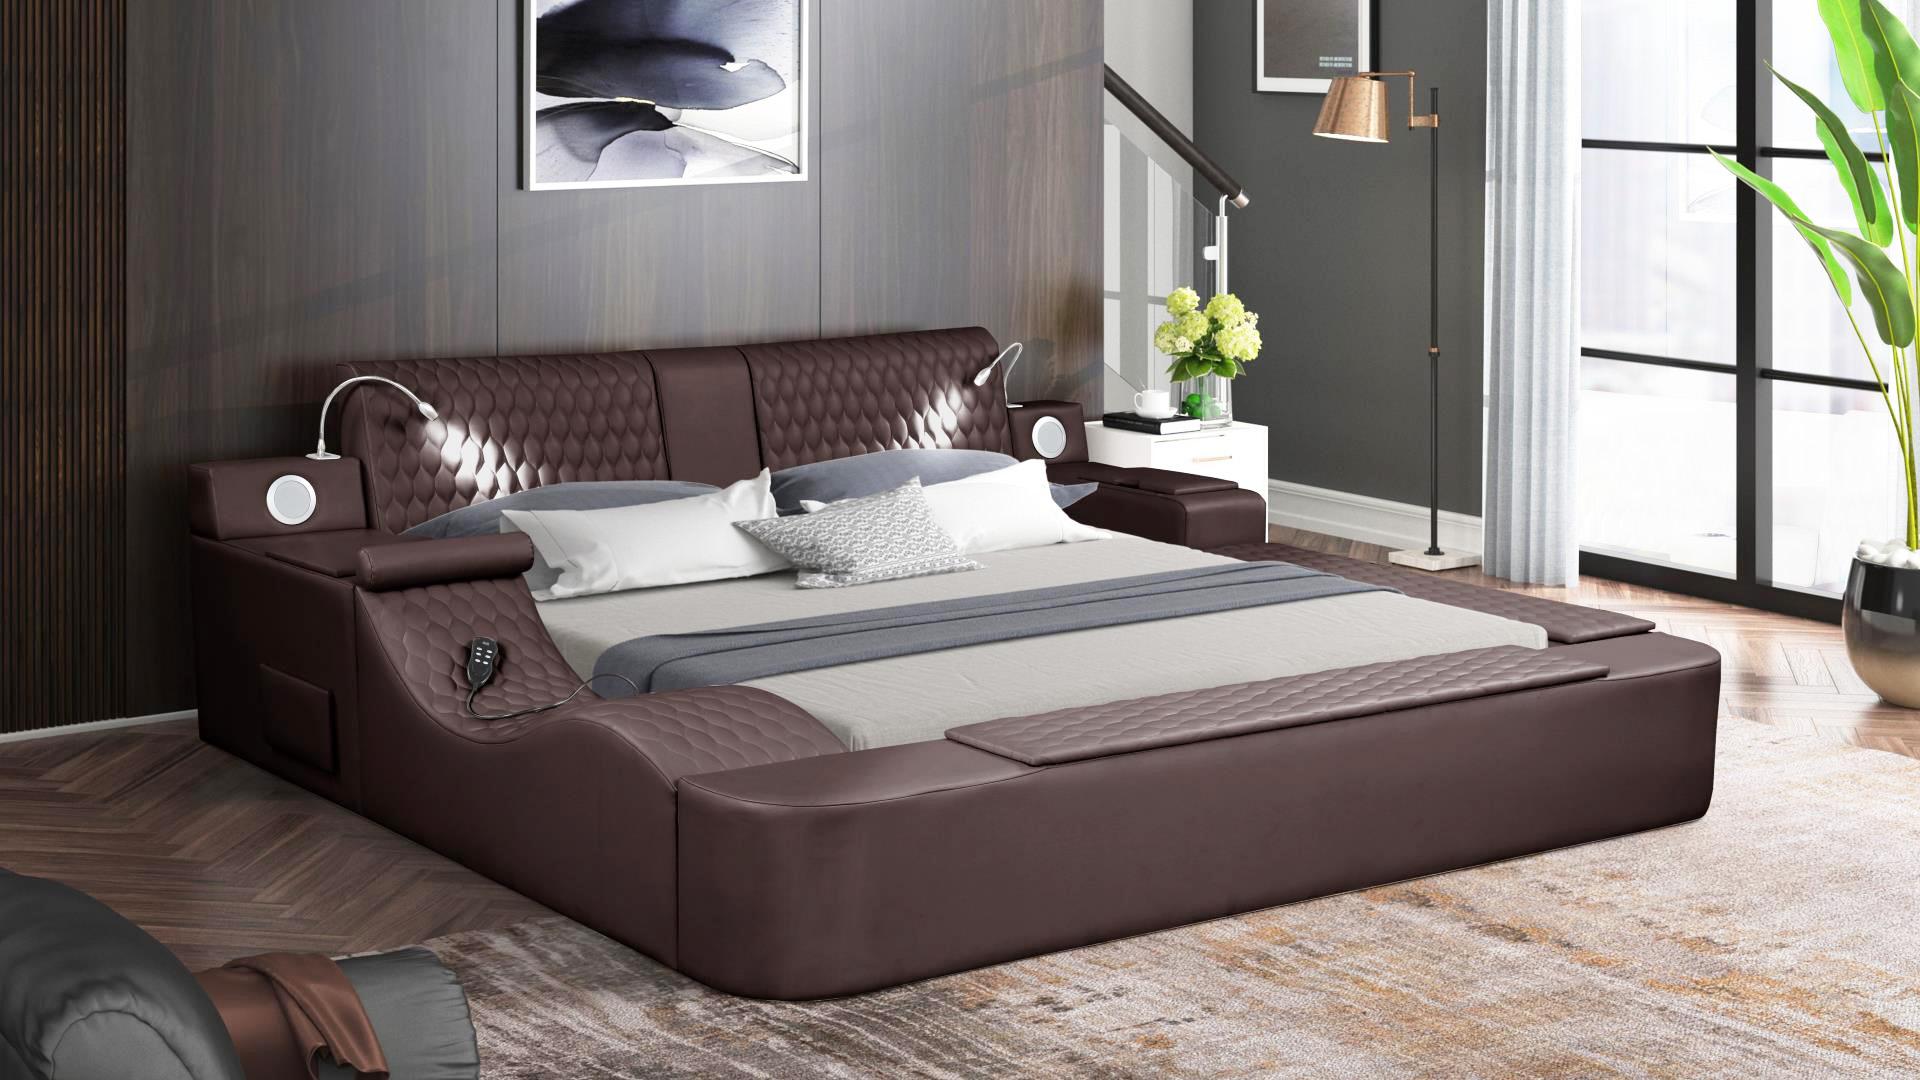 

    
Brown Eco Leather Smart Multifunctional King Bed ZOYA Galaxy Home Contemporary
